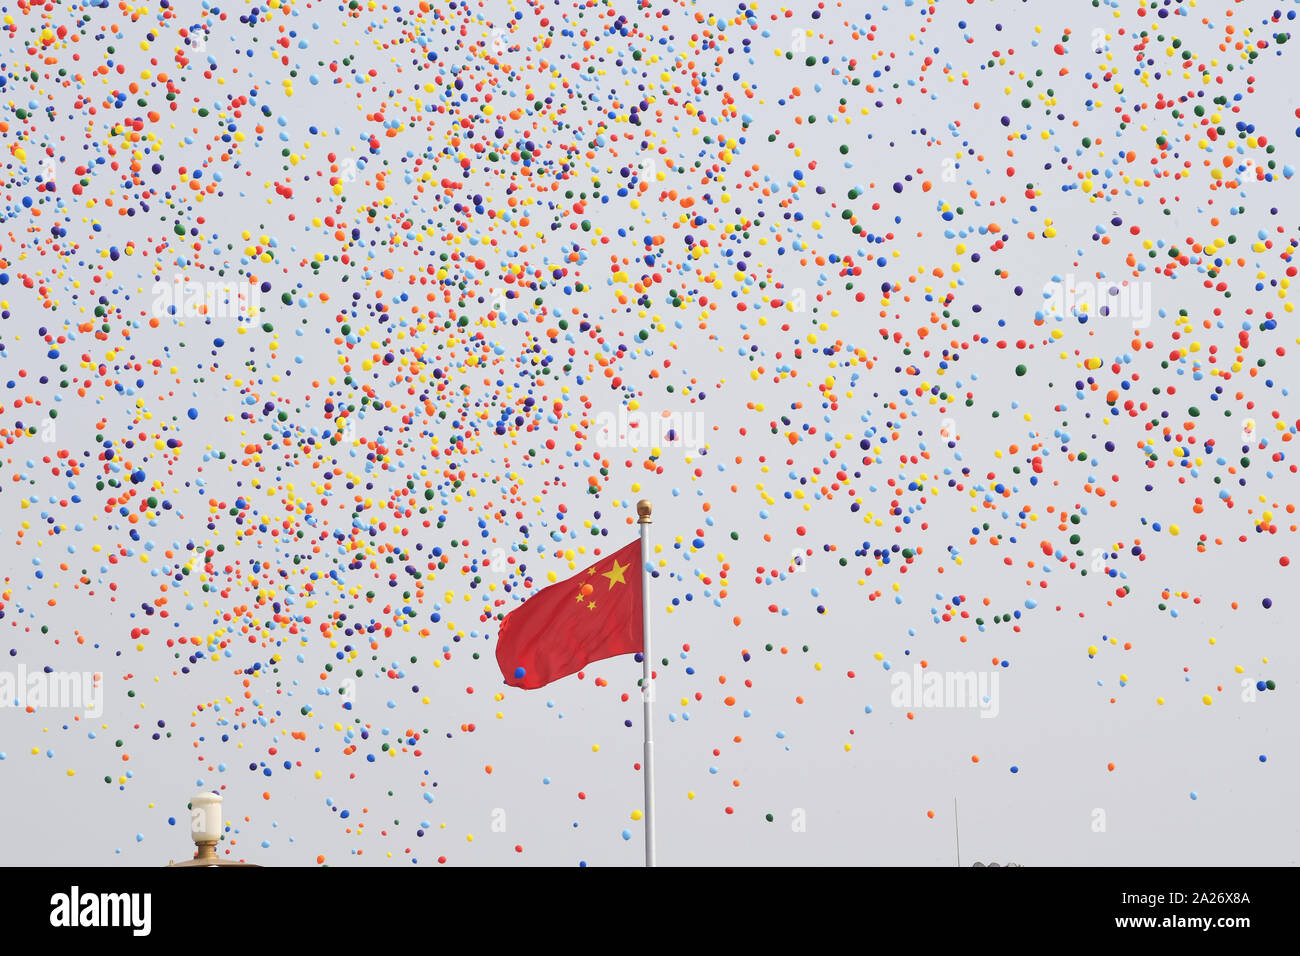 Beijing, China. 1st Oct, 2019. Balloons are released during the celebrations marking the 70th anniversary of the founding of the People's Republic of China (PRC) at Tian'anmen Square in Beijing, capital of China, Oct. 1, 2019. Credit: Liu Junxi/Xinhua/Alamy Live News Stock Photo